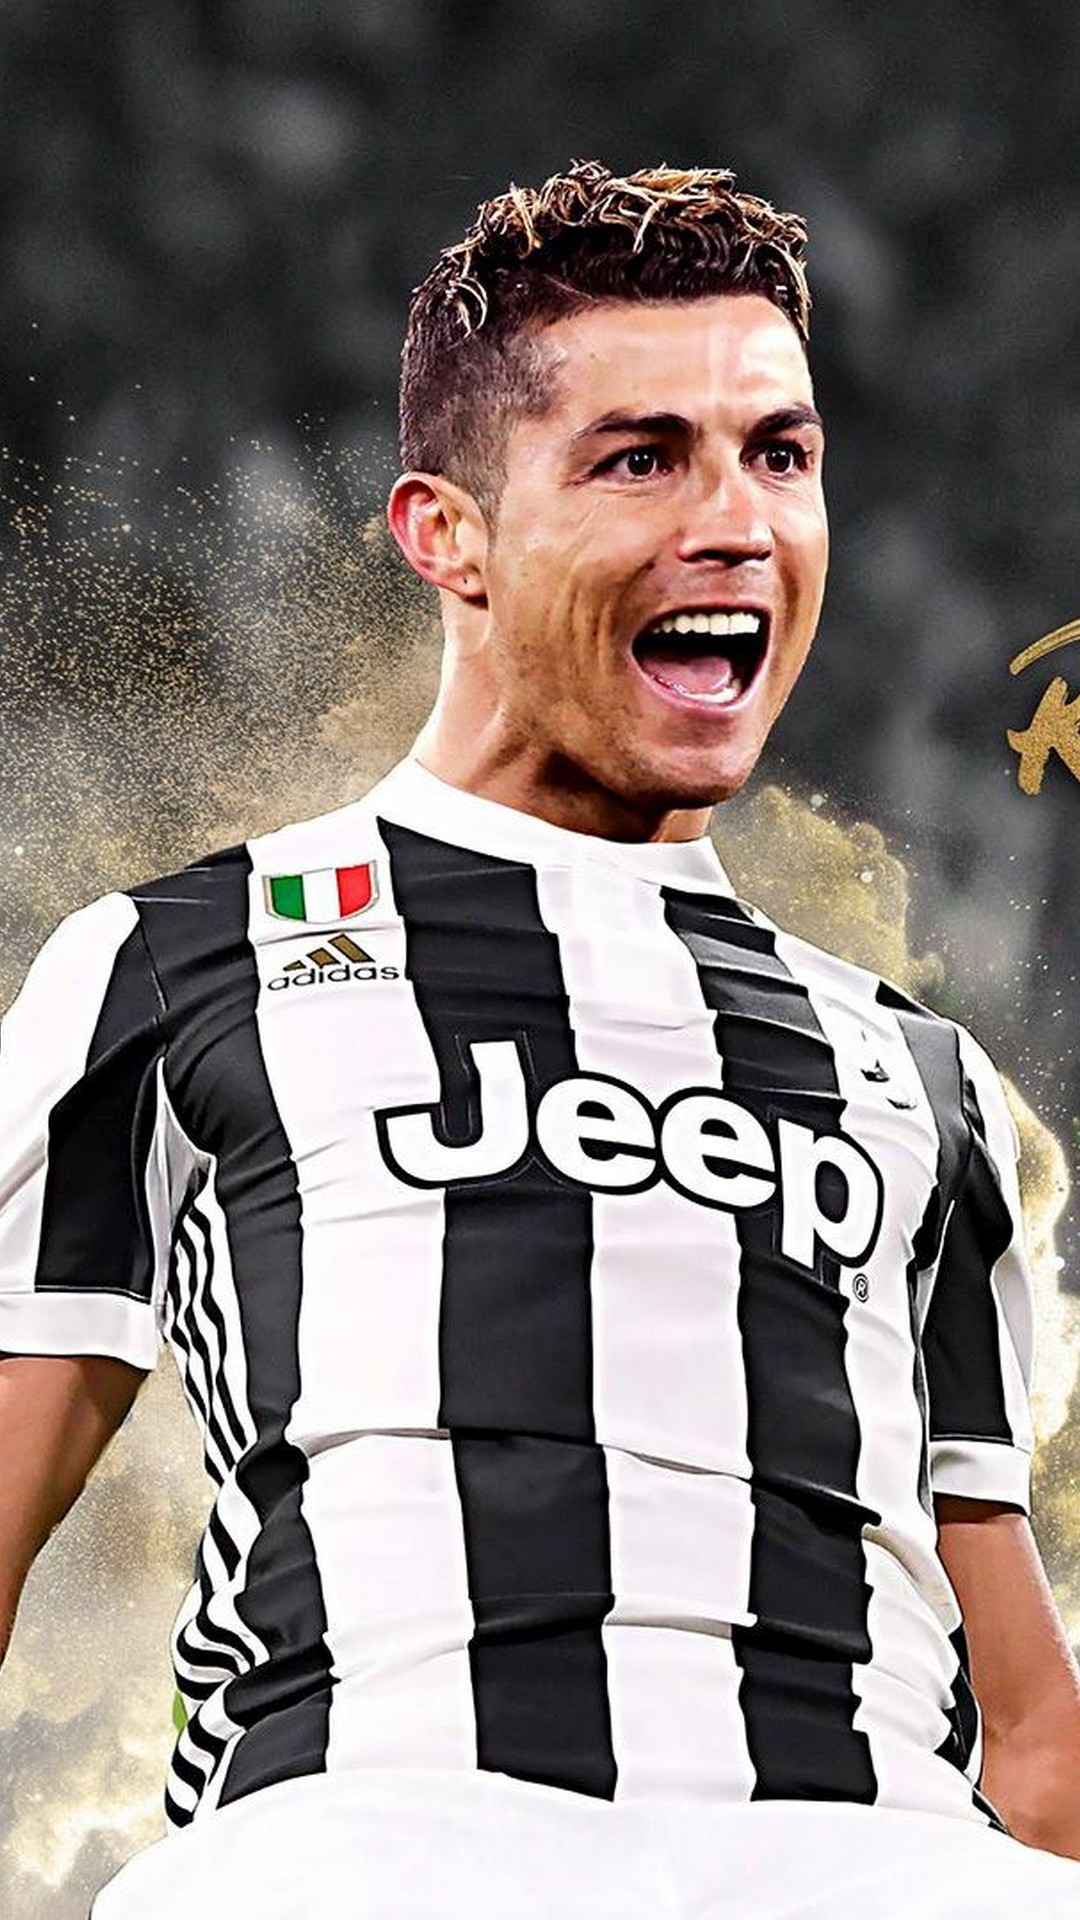 CR7 Juventus Wallpaper Android with image resolution 1080x1920 pixel. You can make this wallpaper for your Android backgrounds, Tablet, Smartphones Screensavers and Mobile Phone Lock Screen